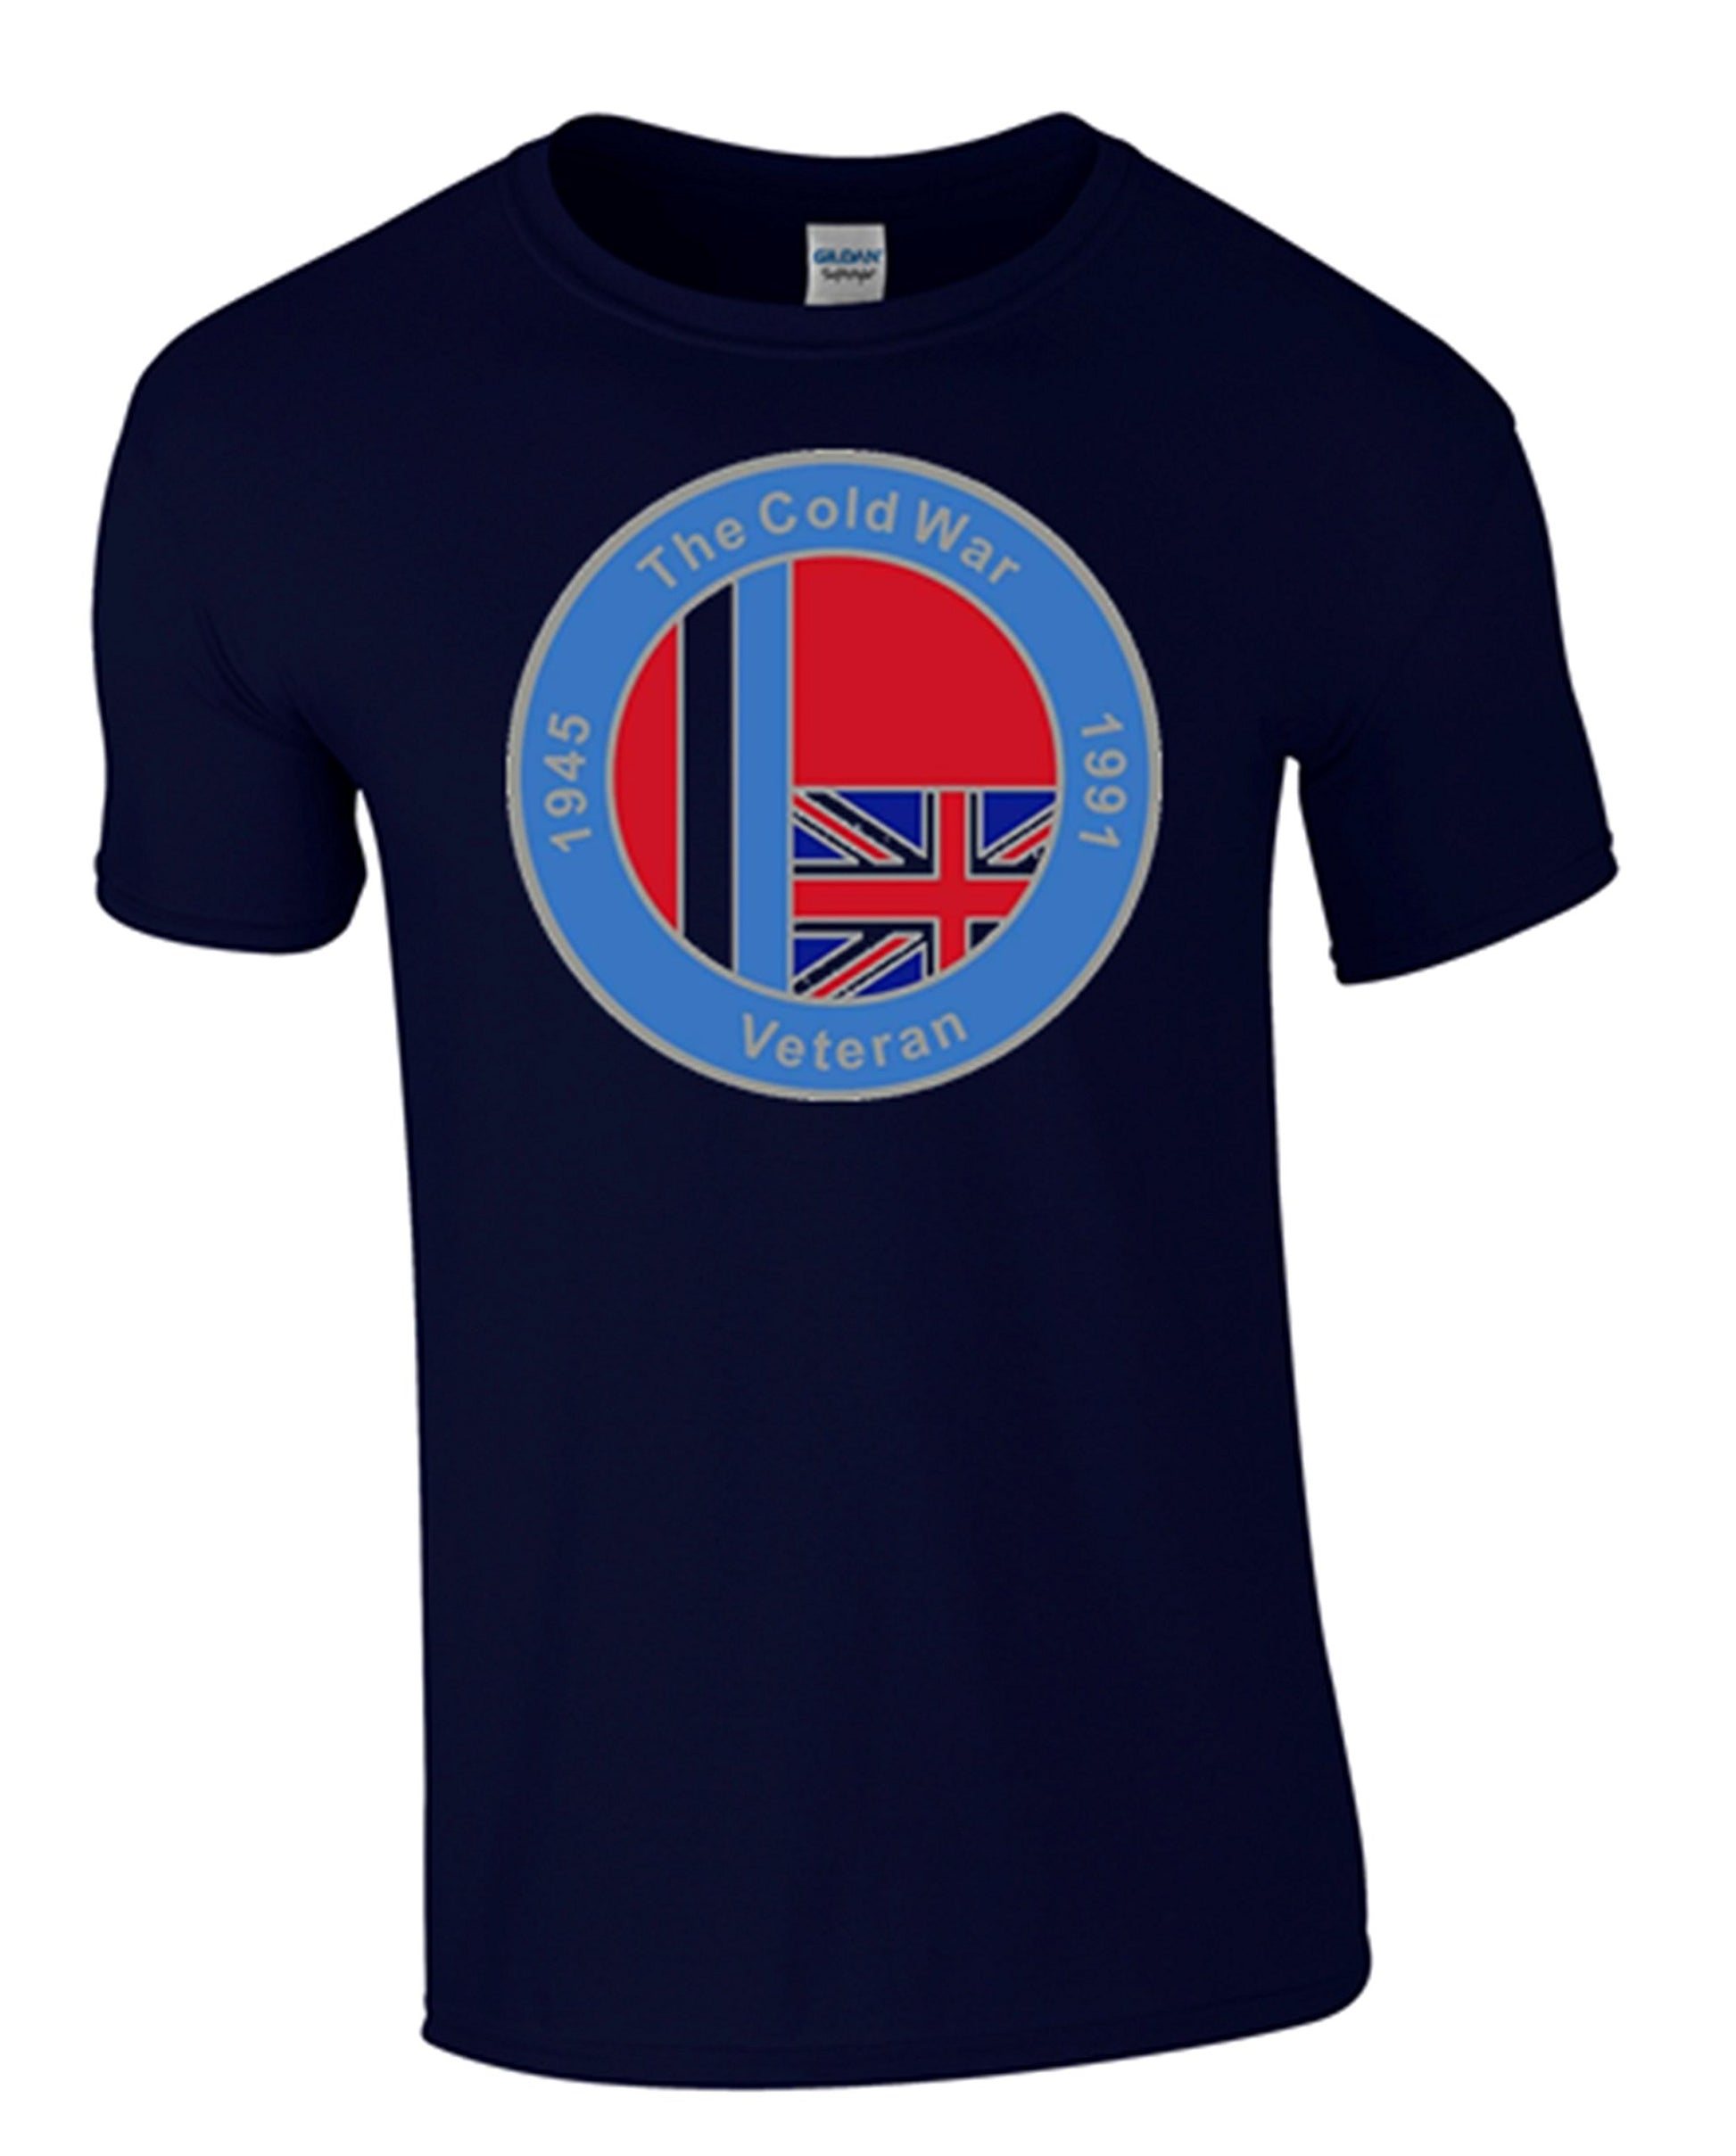 Bear Essentials Clothing. Cold War Op Banner T/Shirt (S, Blue) - Army 1157 kit Army 1157 Kit